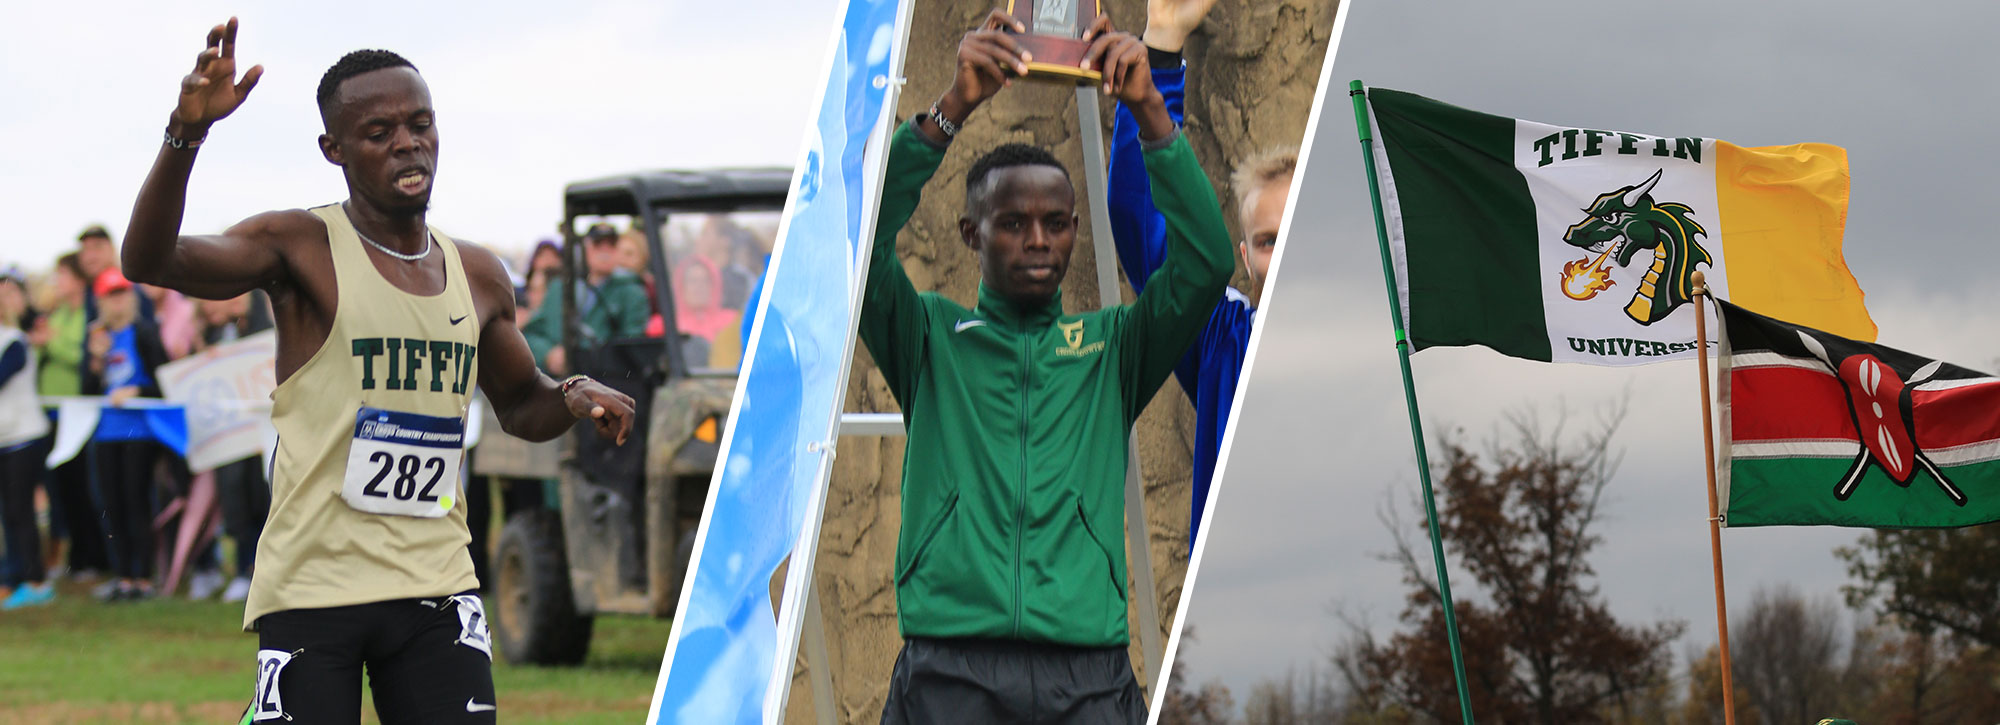 Tiffin's Ngandu Named 2017 USTFCCCA NCAA Division II Cross Country Athlete of the Year